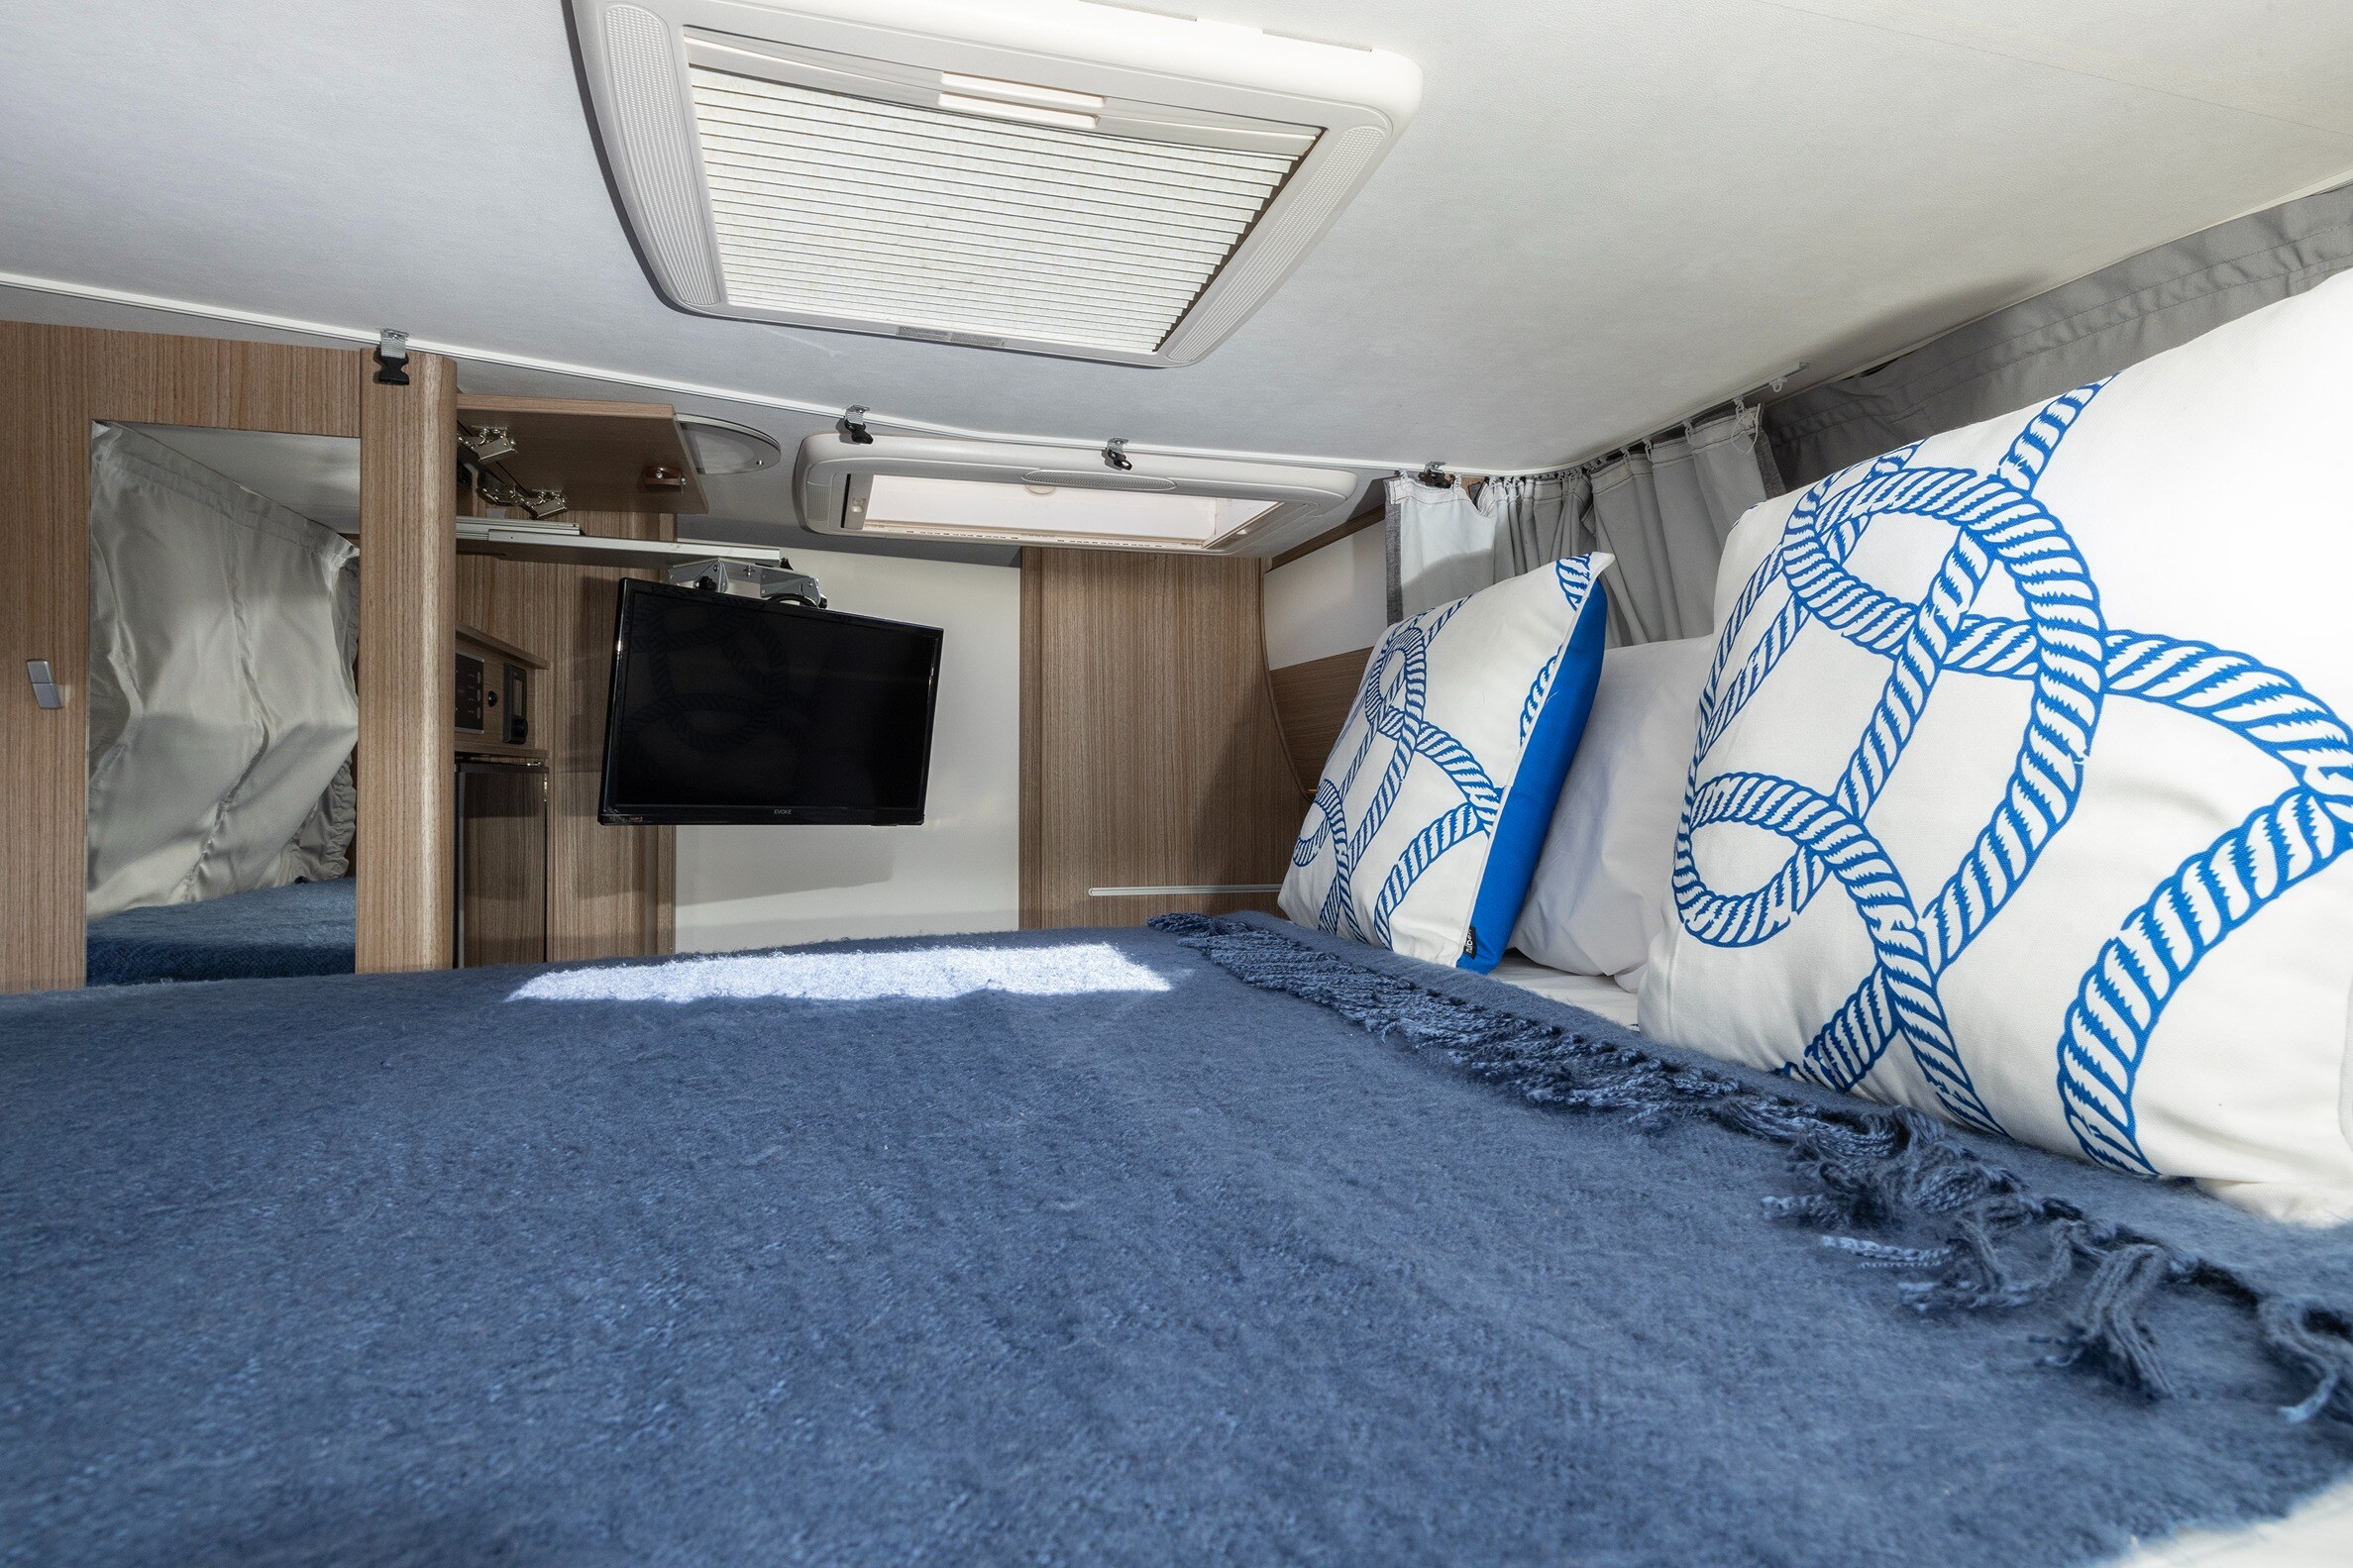 Wilderness 2019 Carado T447 motorhome drop down bed from above